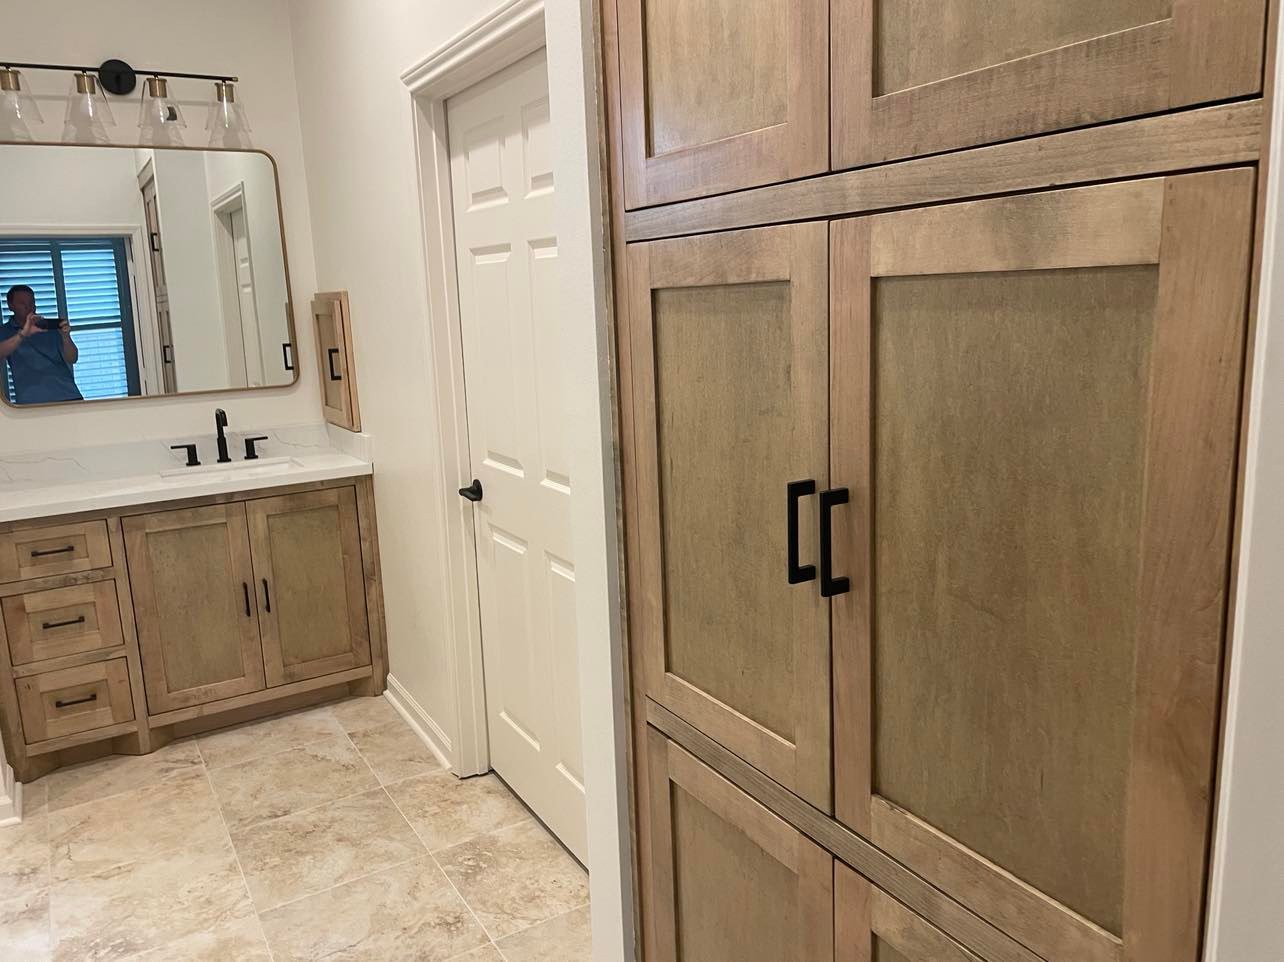 A fully accessible bathroom with style! 